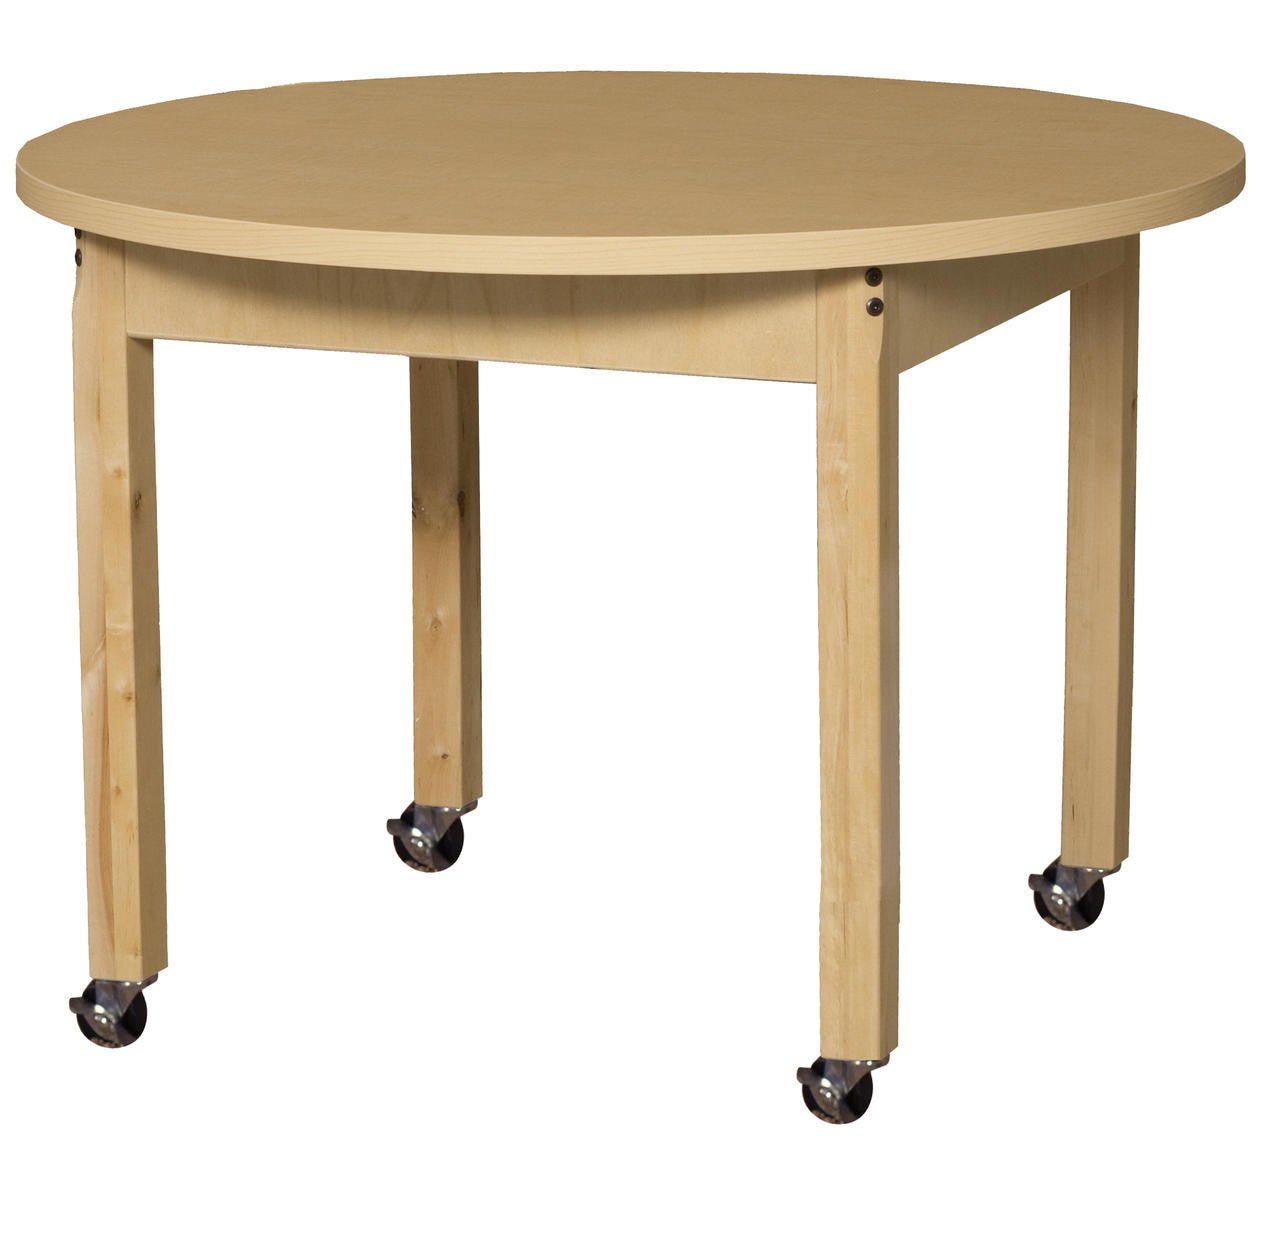 Round High Pressure Laminate Table with Hardwood Legs- 22